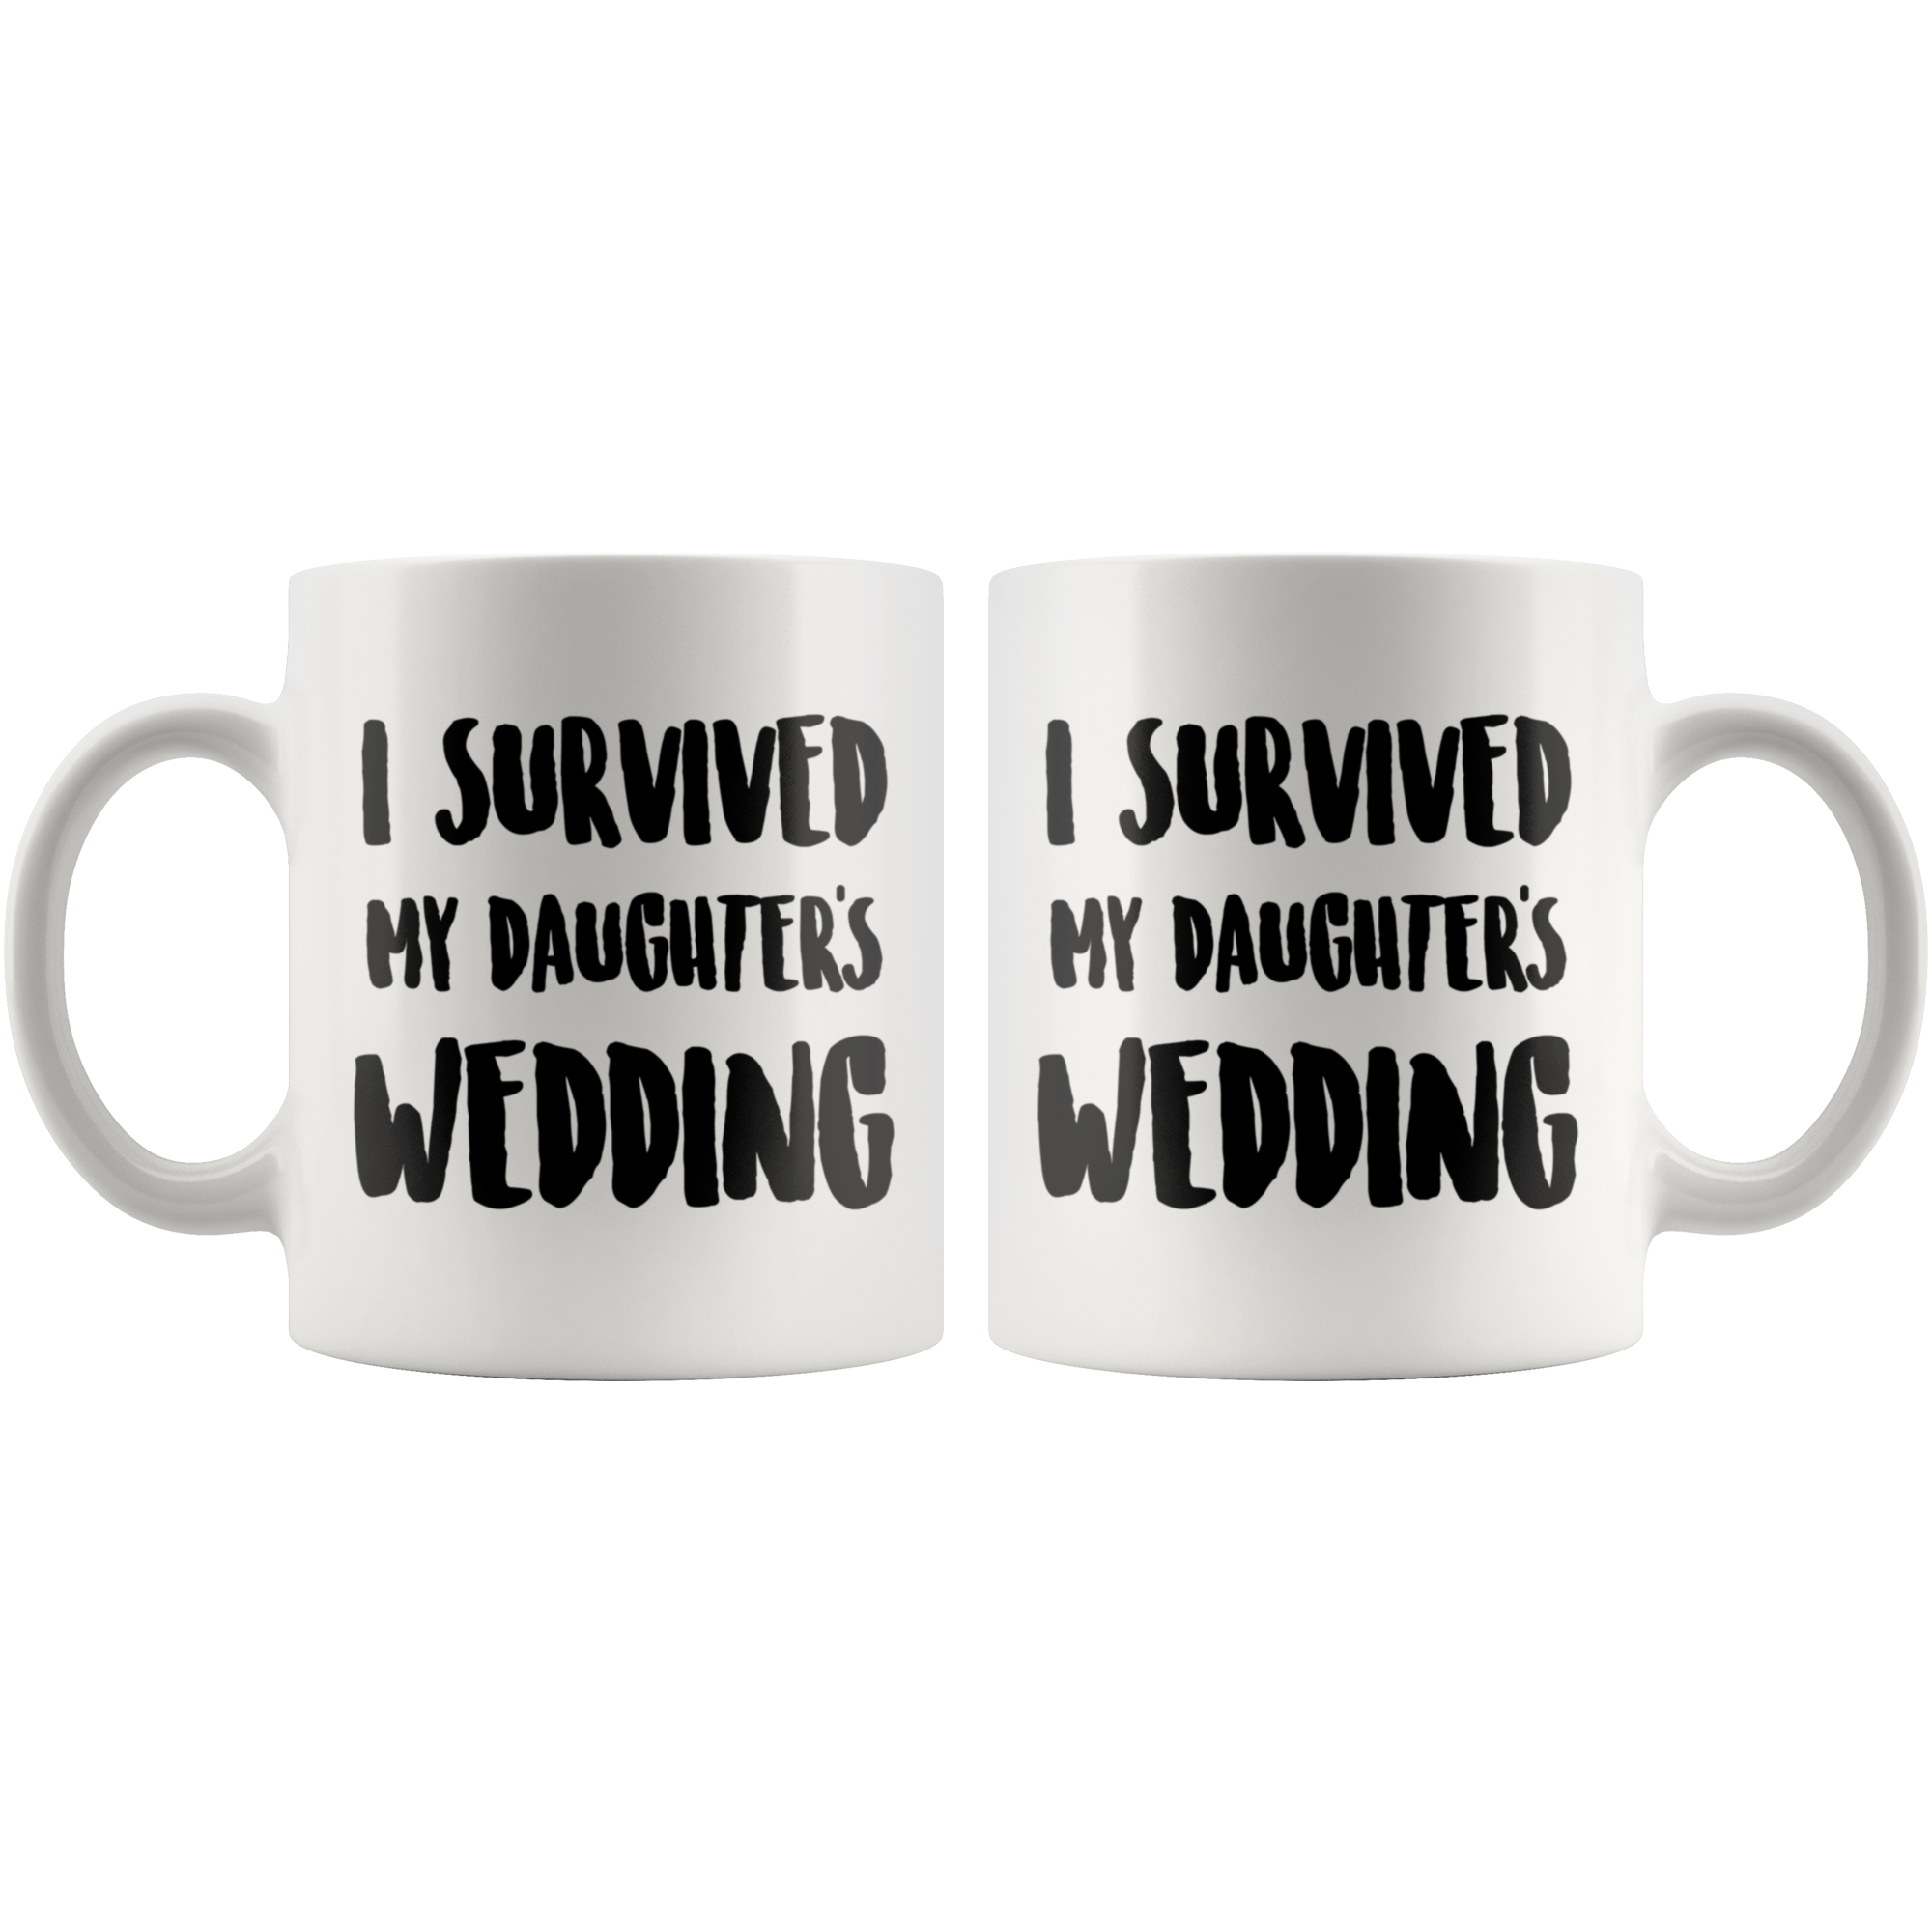 Survived daughter's wed mug - Guestbookery